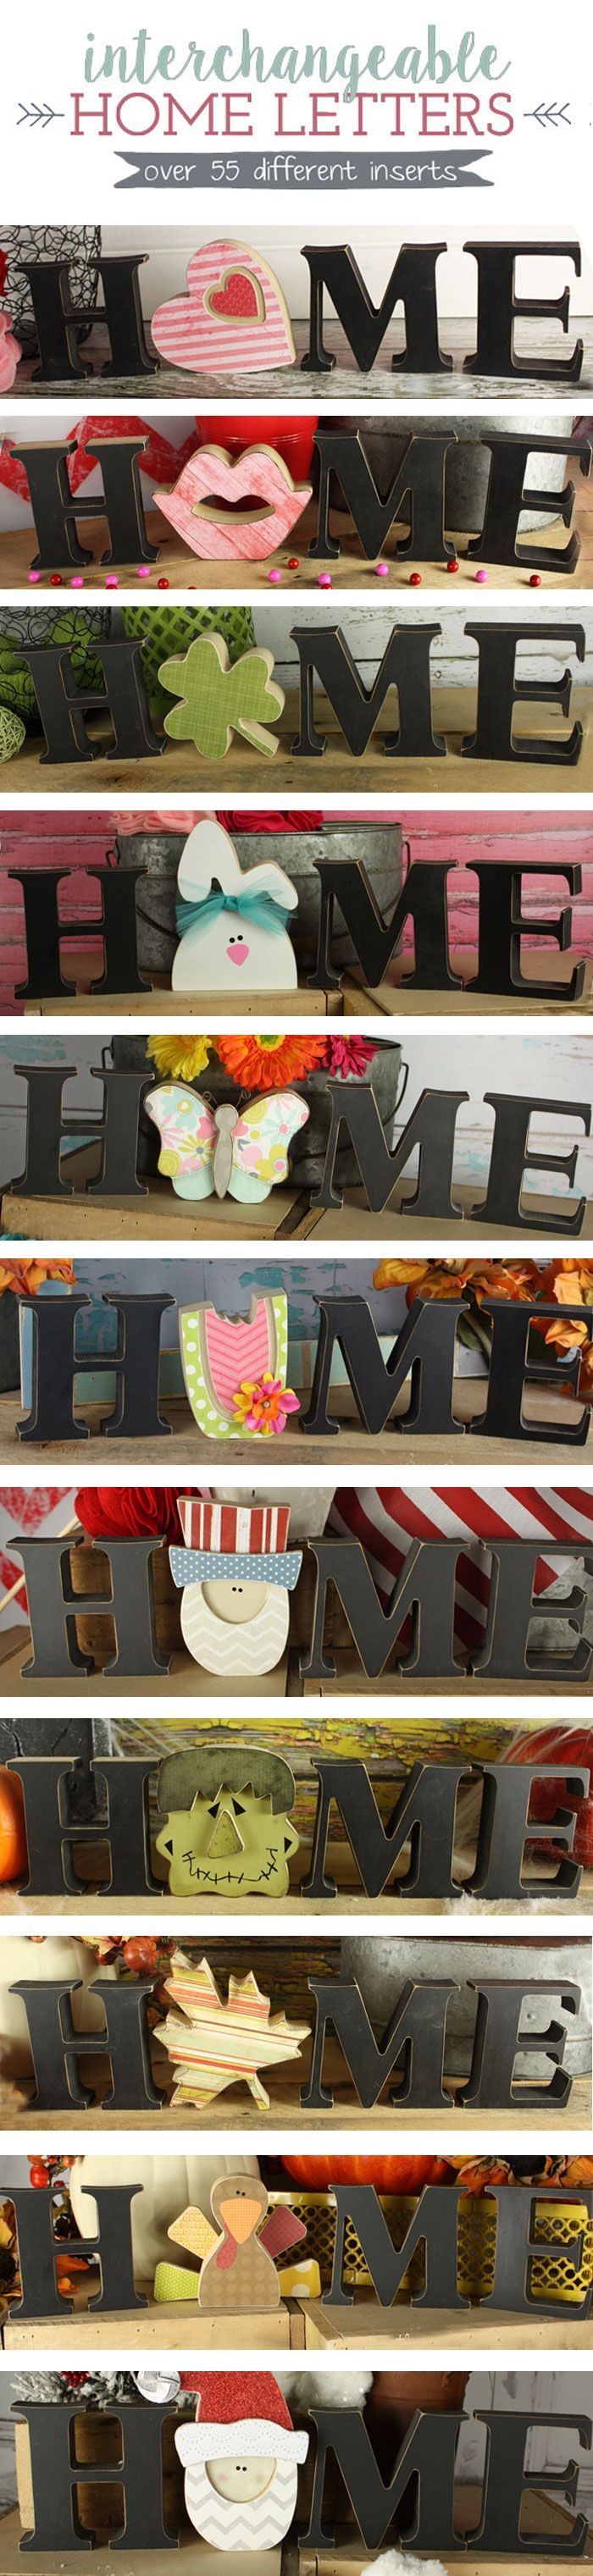 Interchangeable Home Letters.  Over 55 different inserts for the letter “O”.  Swap it out for each holiday/season.  So Cute!!  Get